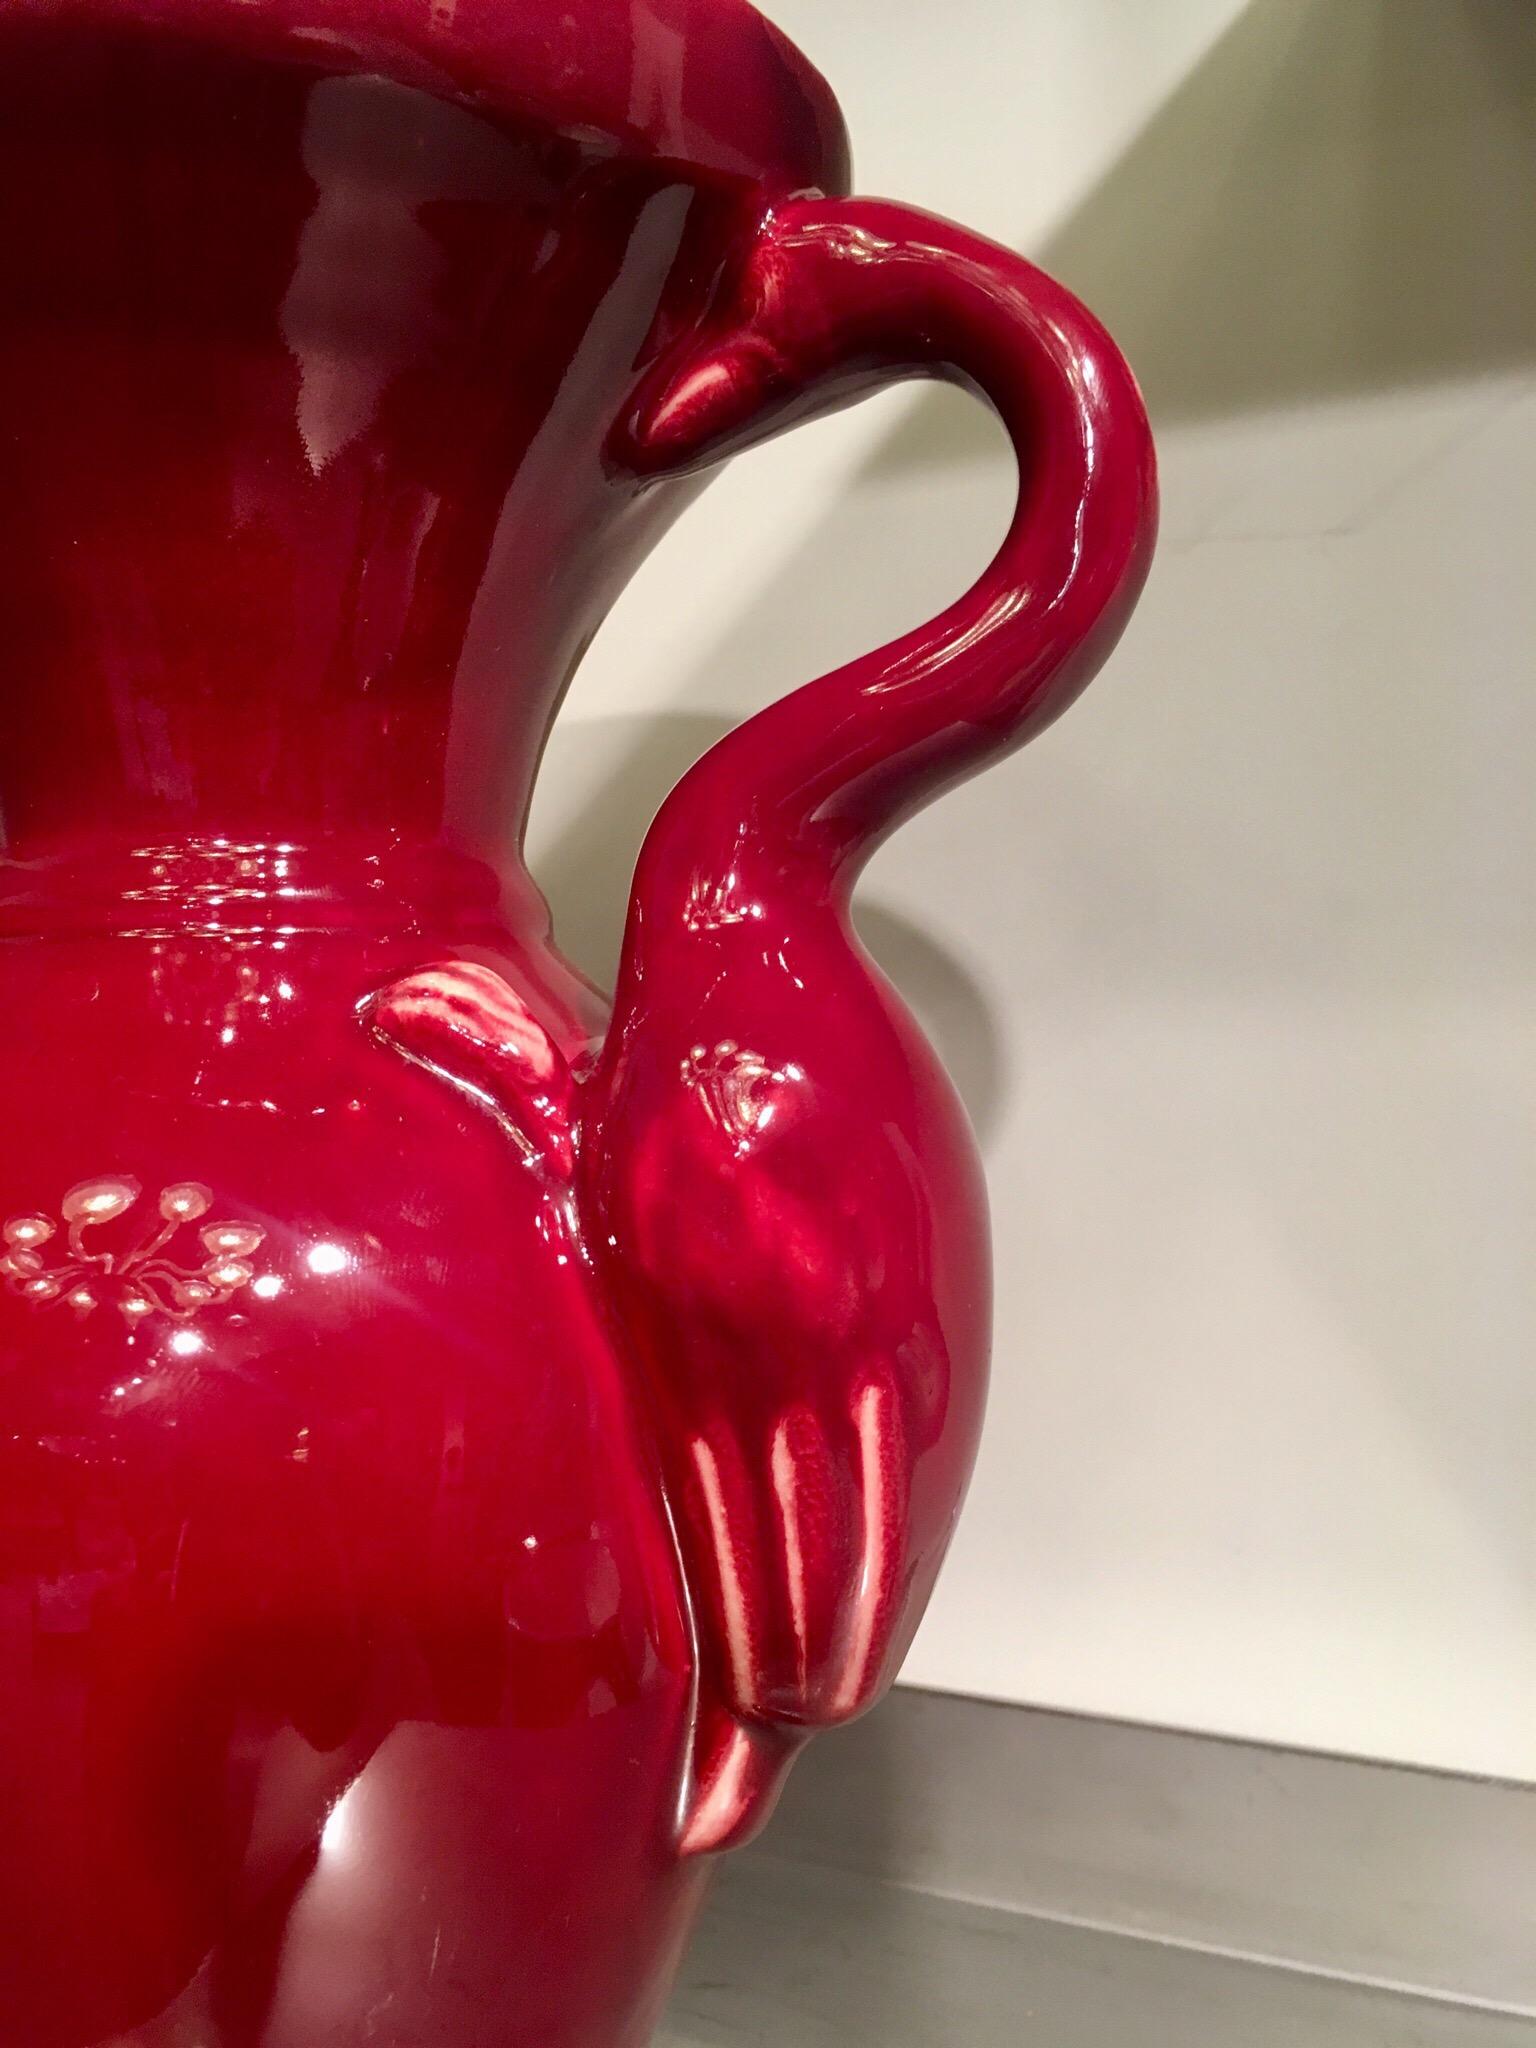 Mid-20th Century Baluster Vase Red Ceramic with Flamingos Ray Camart, Antibes France, circa 1950 For Sale